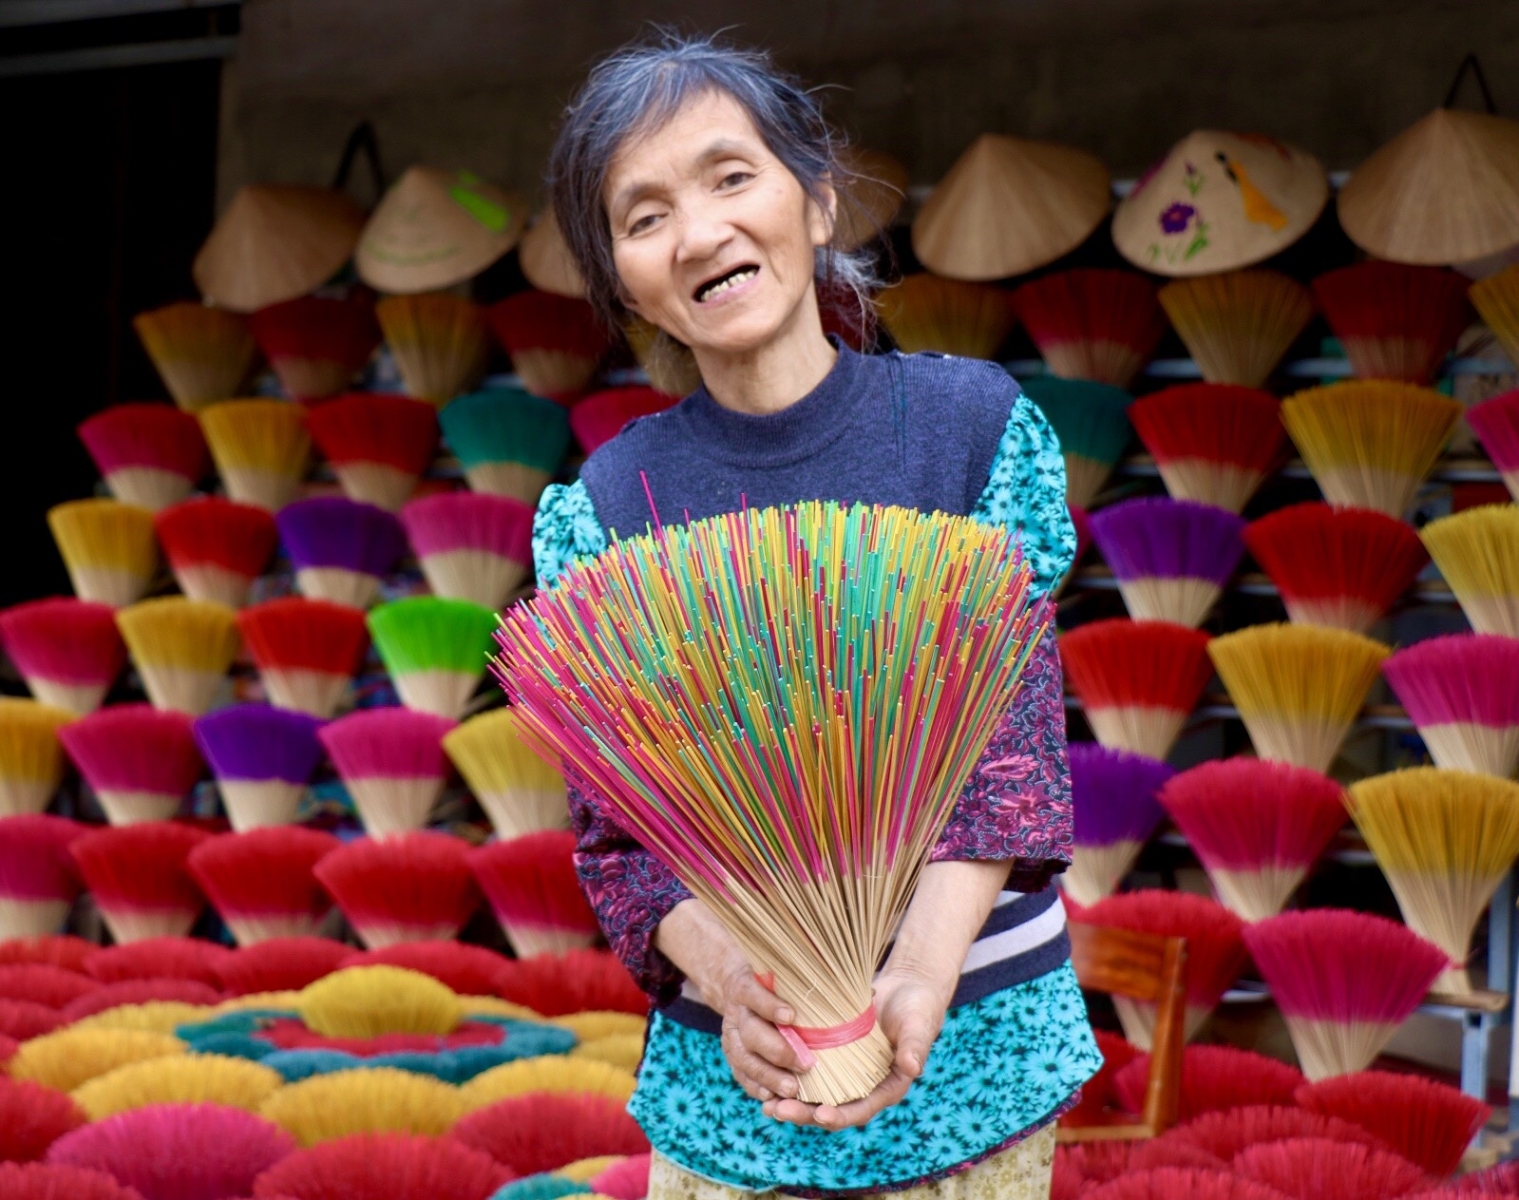 Famous incense-making village in Hue turns colorful as Tet nears